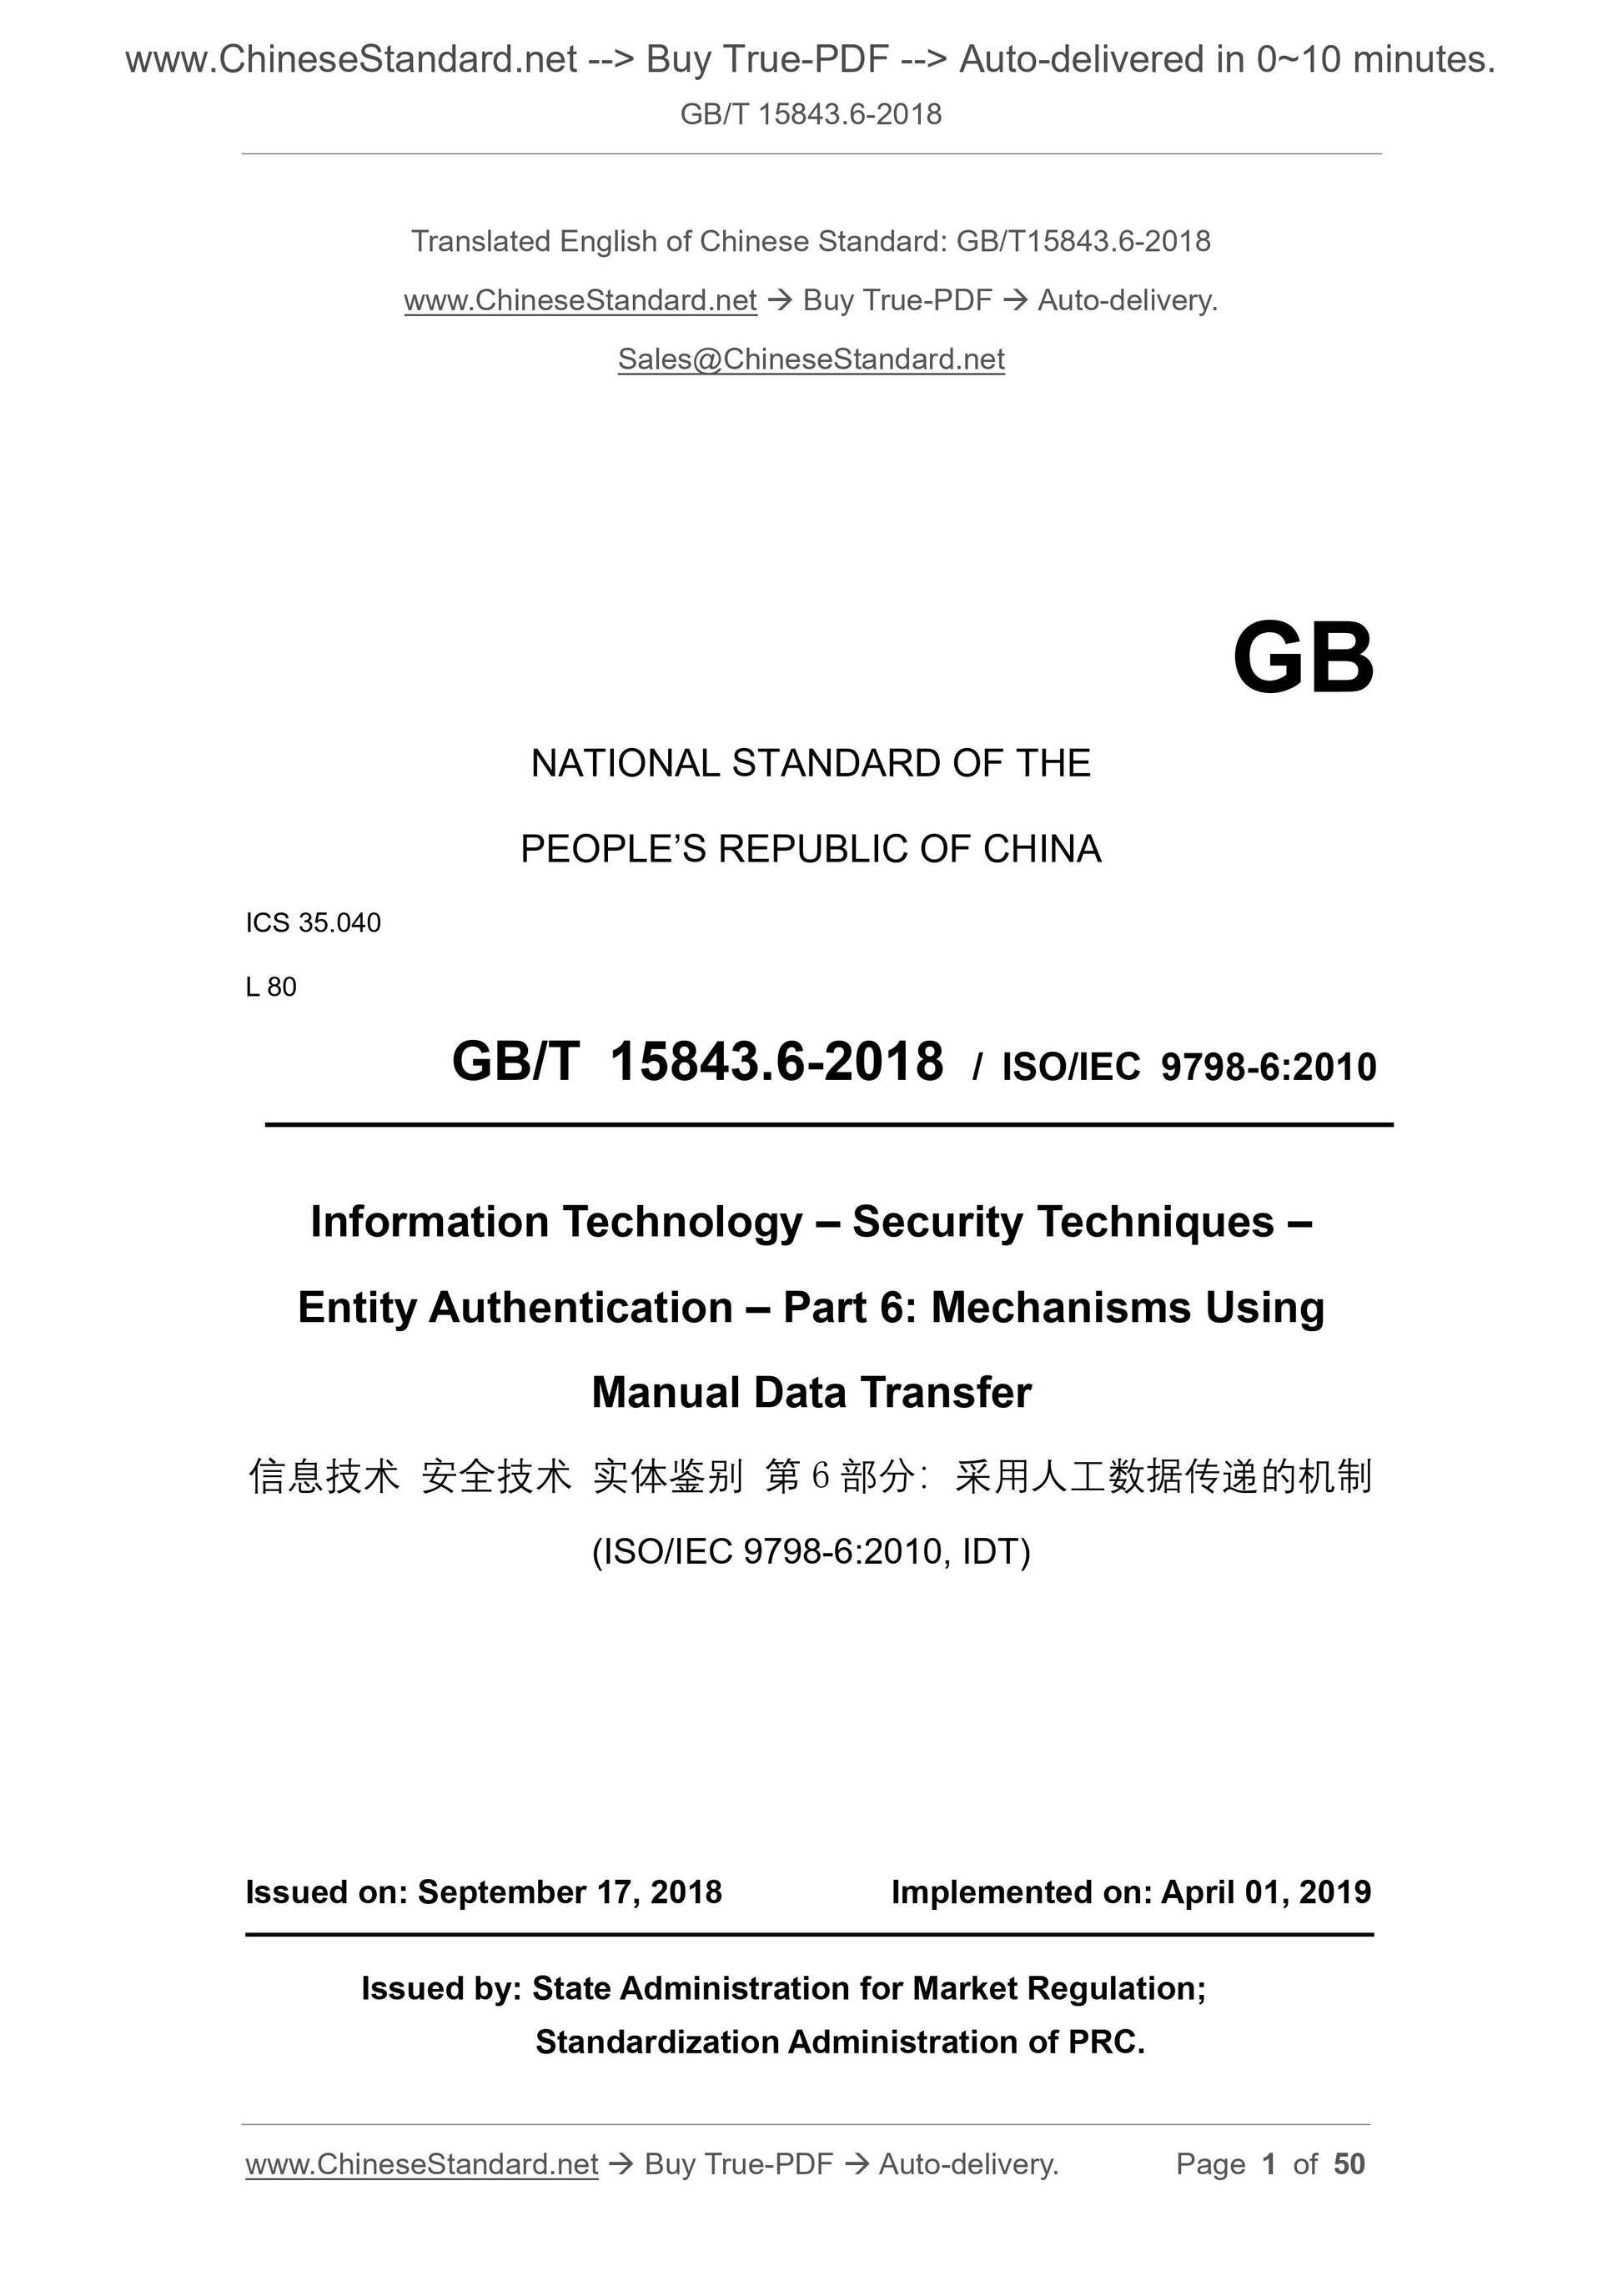 GB/T 15843.6-2018 Page 1